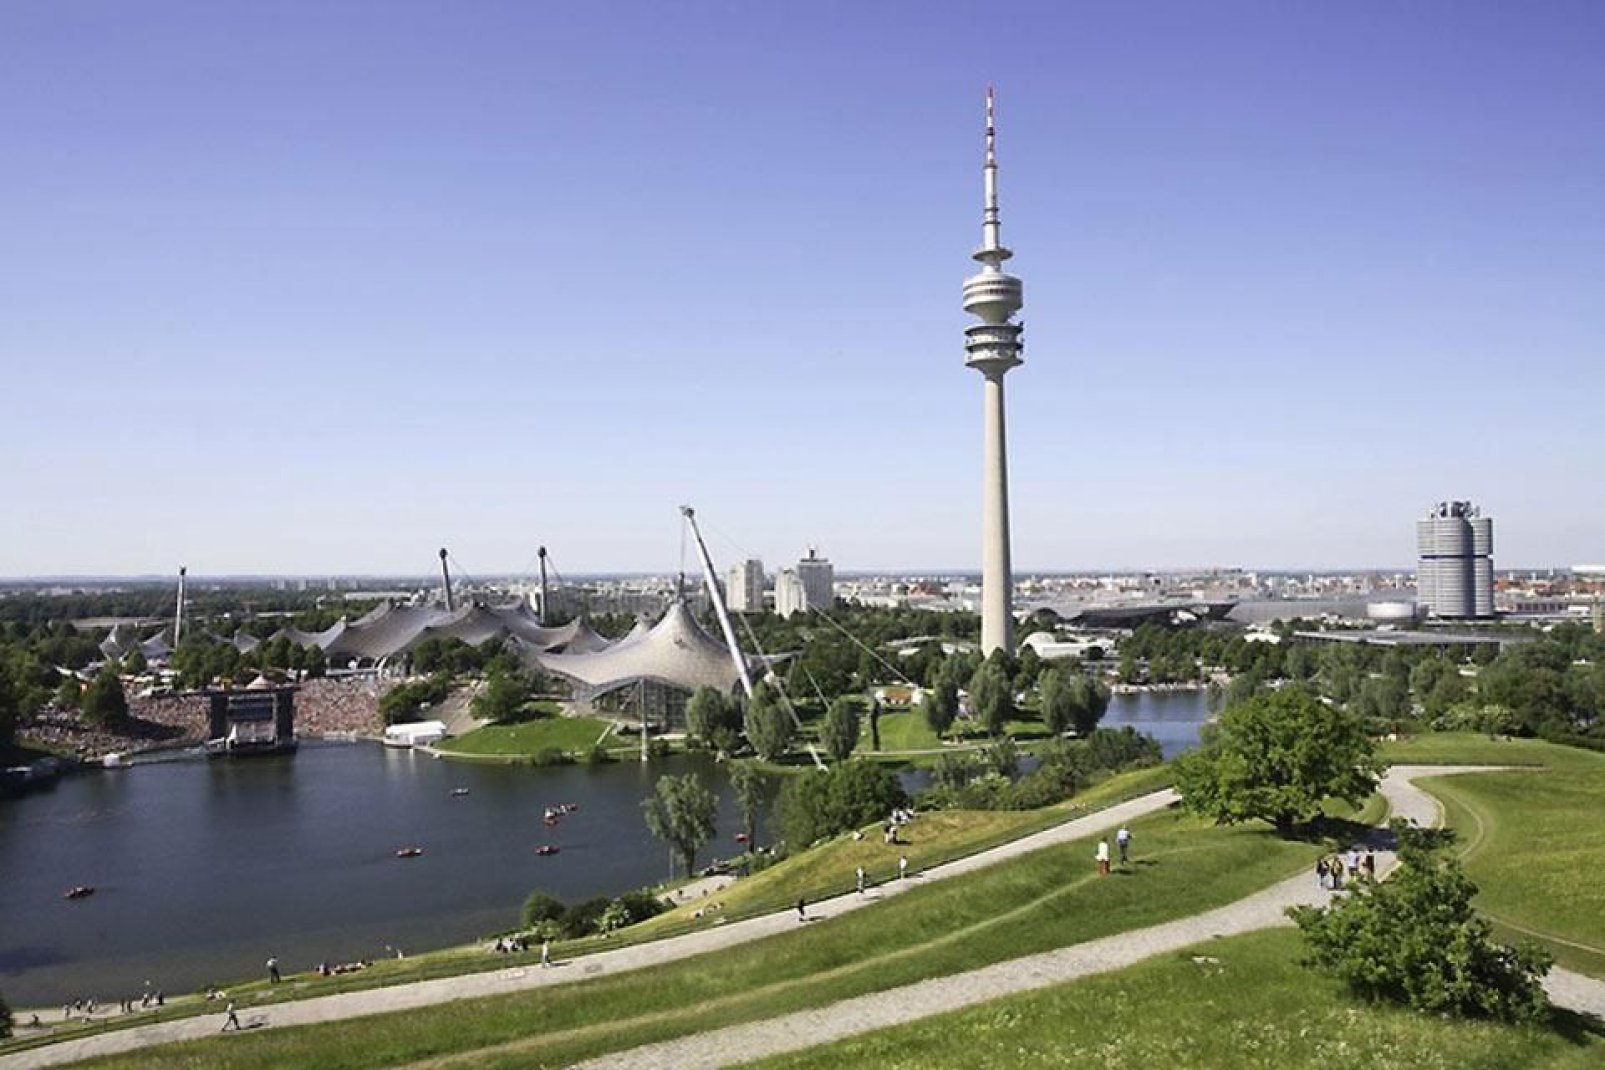 You can enjoy a fantastic view of Munich from the television tower